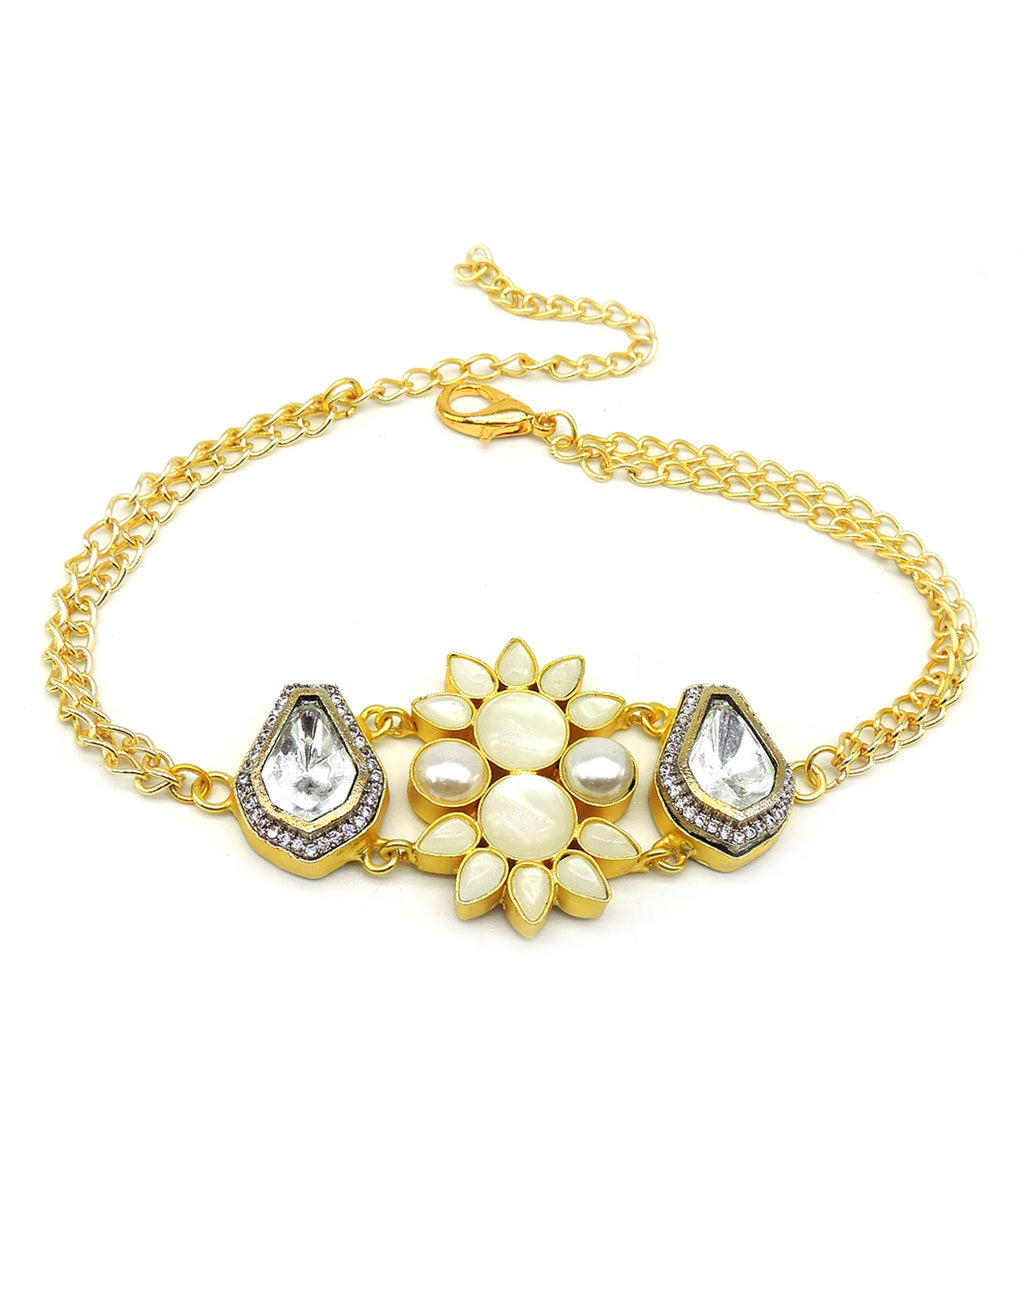 Double Flower Necklace - Statement Necklaces - Gold-Plated & Hypoallergenic Jewellery - Made in India - Dubai Jewellery - Dori